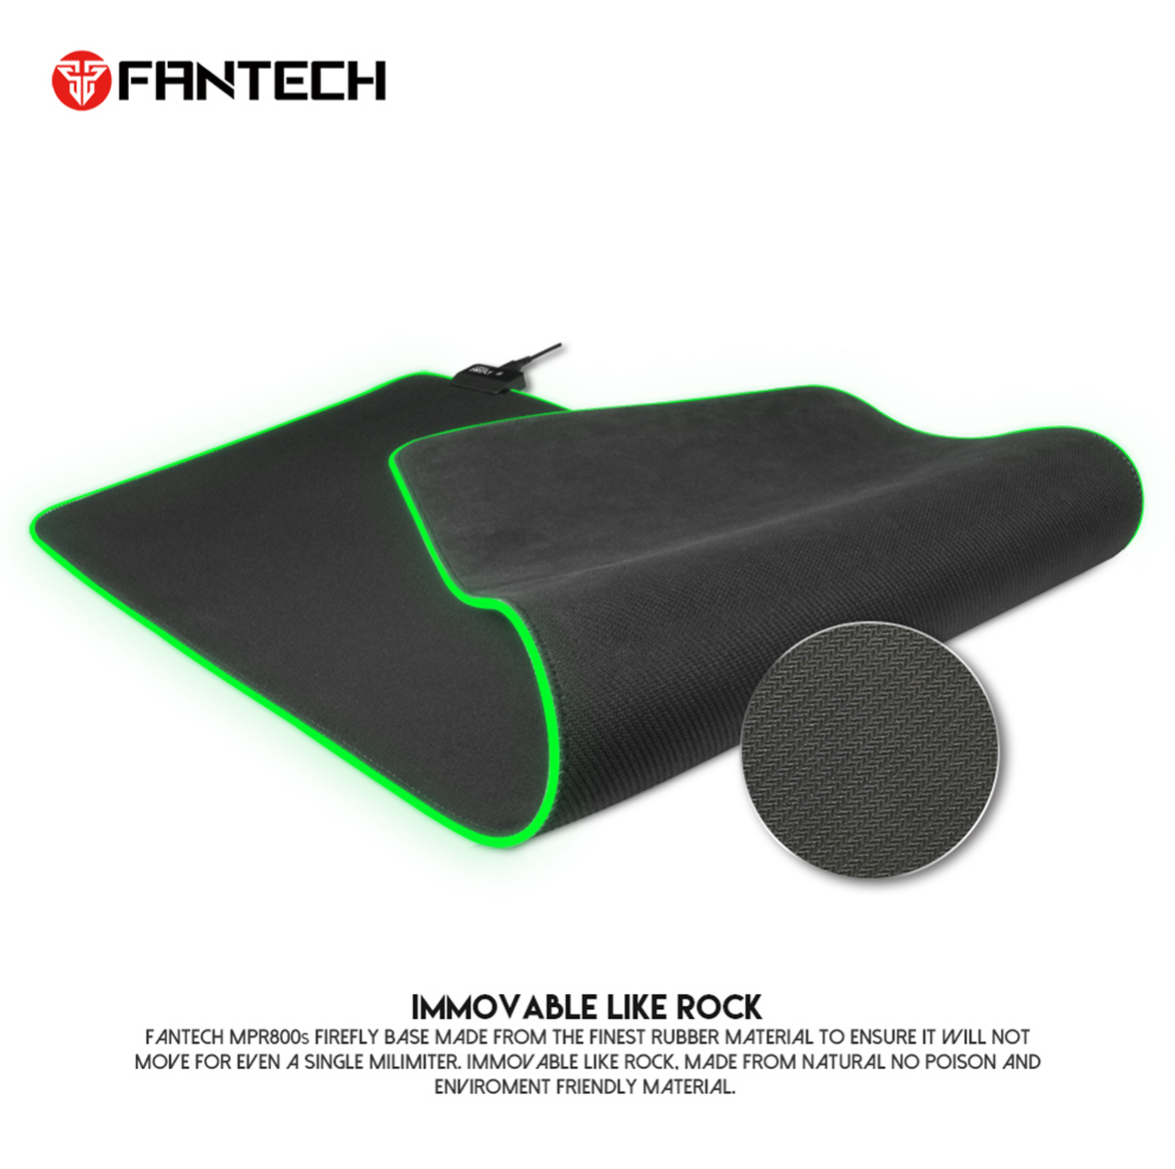 A large marketing image providing additional information about the product Fantech Firefly MPR800s Large Size Deskmat RGB Mousemat - Black - Additional alt info not provided